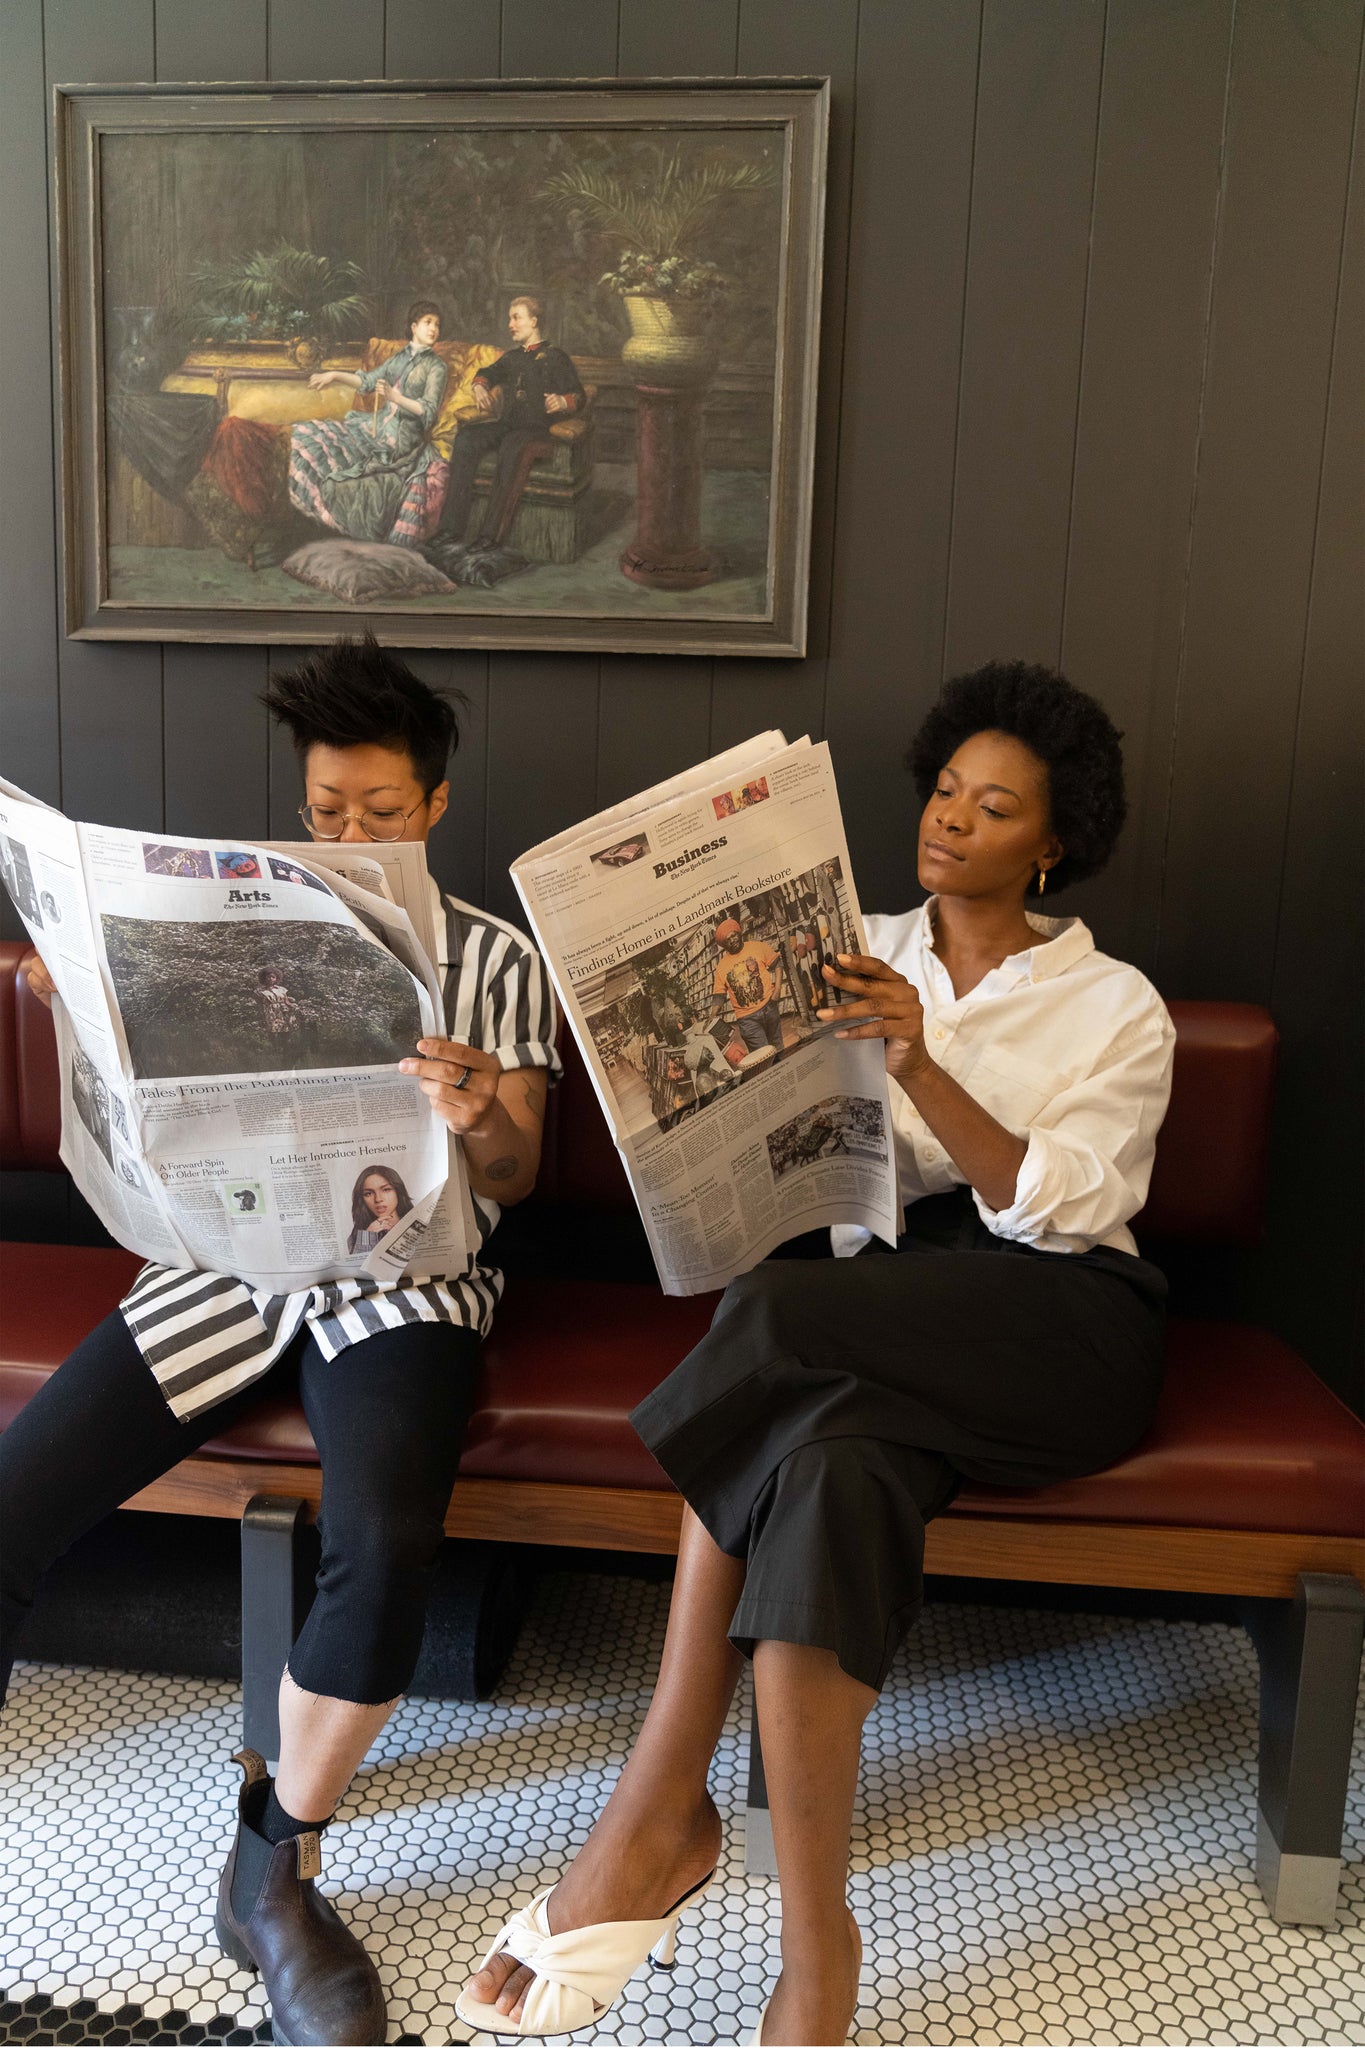 Asian short-haired person and black woman with fro reading newspapers in Barbershop waiting room